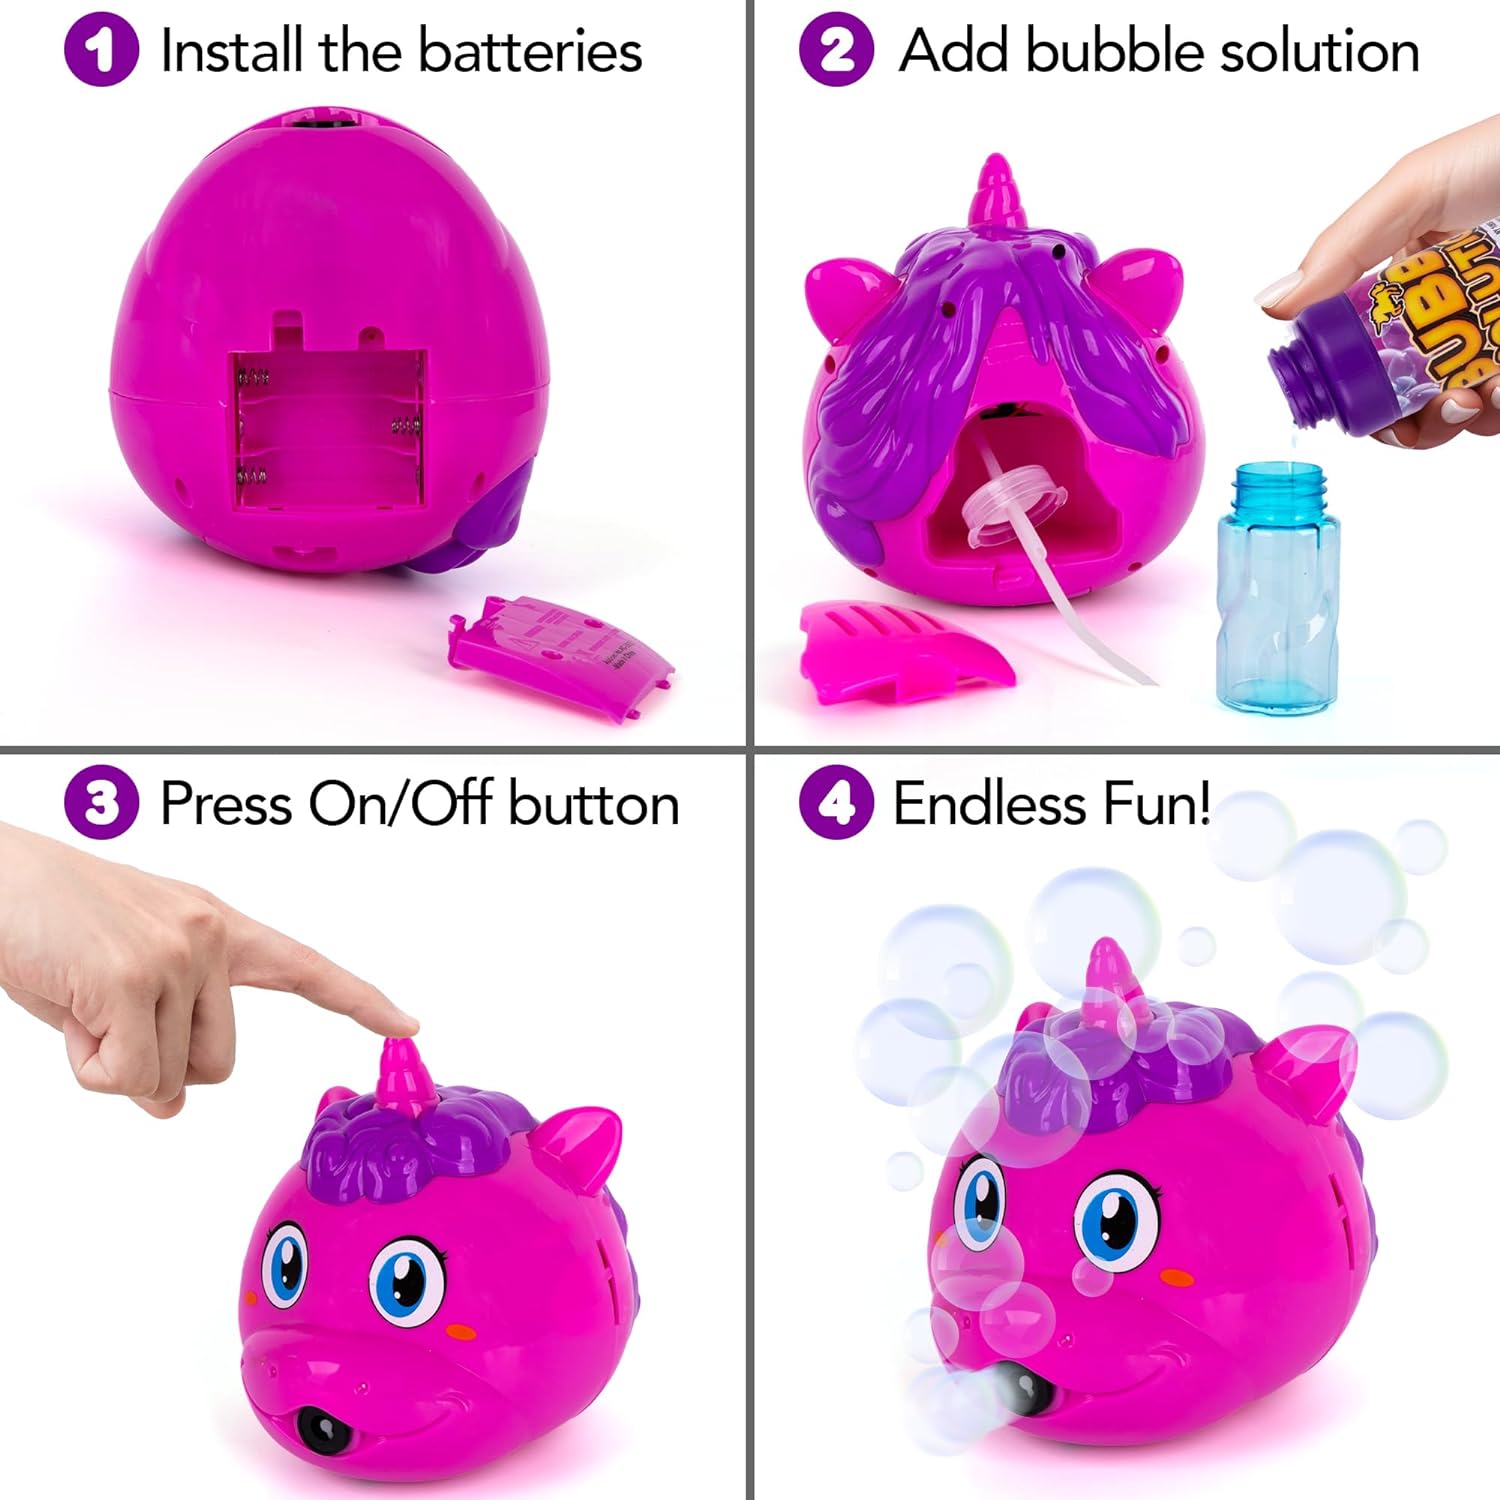 Unicorn Bubble Machine for Kids, Set of 2, Bubble Blower with Bubble Solution Included, Pink & Purple Unicorn Bubble Toys for Girls & Boys